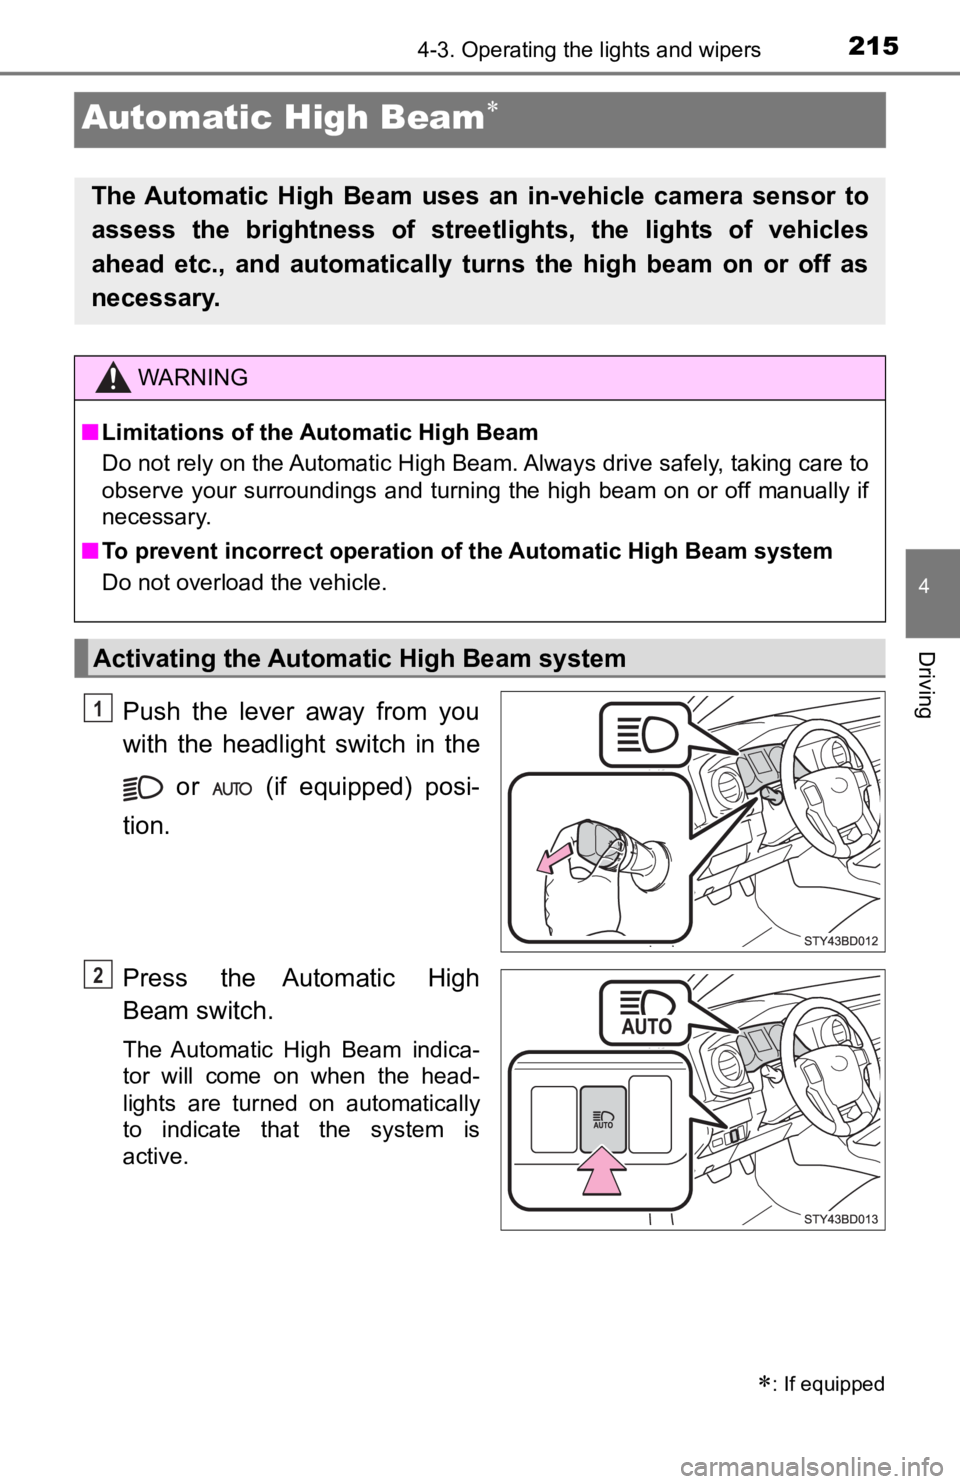 TOYOTA TACOMA 2019  Owners Manual (in English) 2154-3. Operating the lights and wipers
4
Driving
Automatic High Beam
Push  the  lever  away  from  you
with  the  headlight  switch  in  the  or    (if  equipped)  posi-
tion.
Press  the  Automati